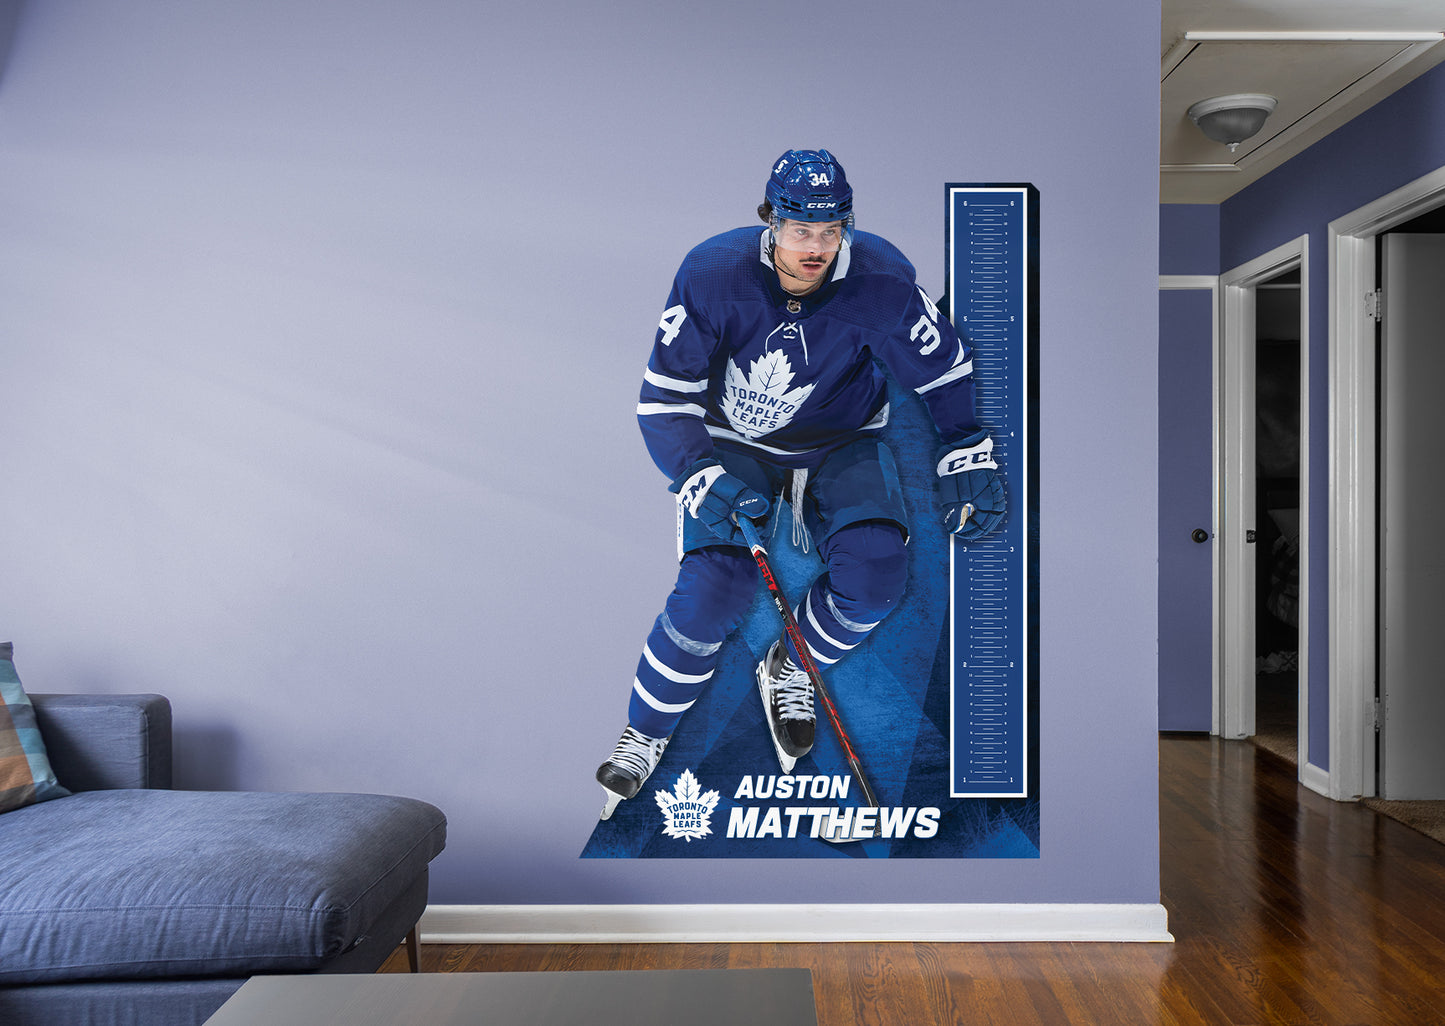 Toronto Maple Leafs: Auston Matthews 2021 Growth Chart        - Officially Licensed NHL Removable Wall   Adhesive Decal